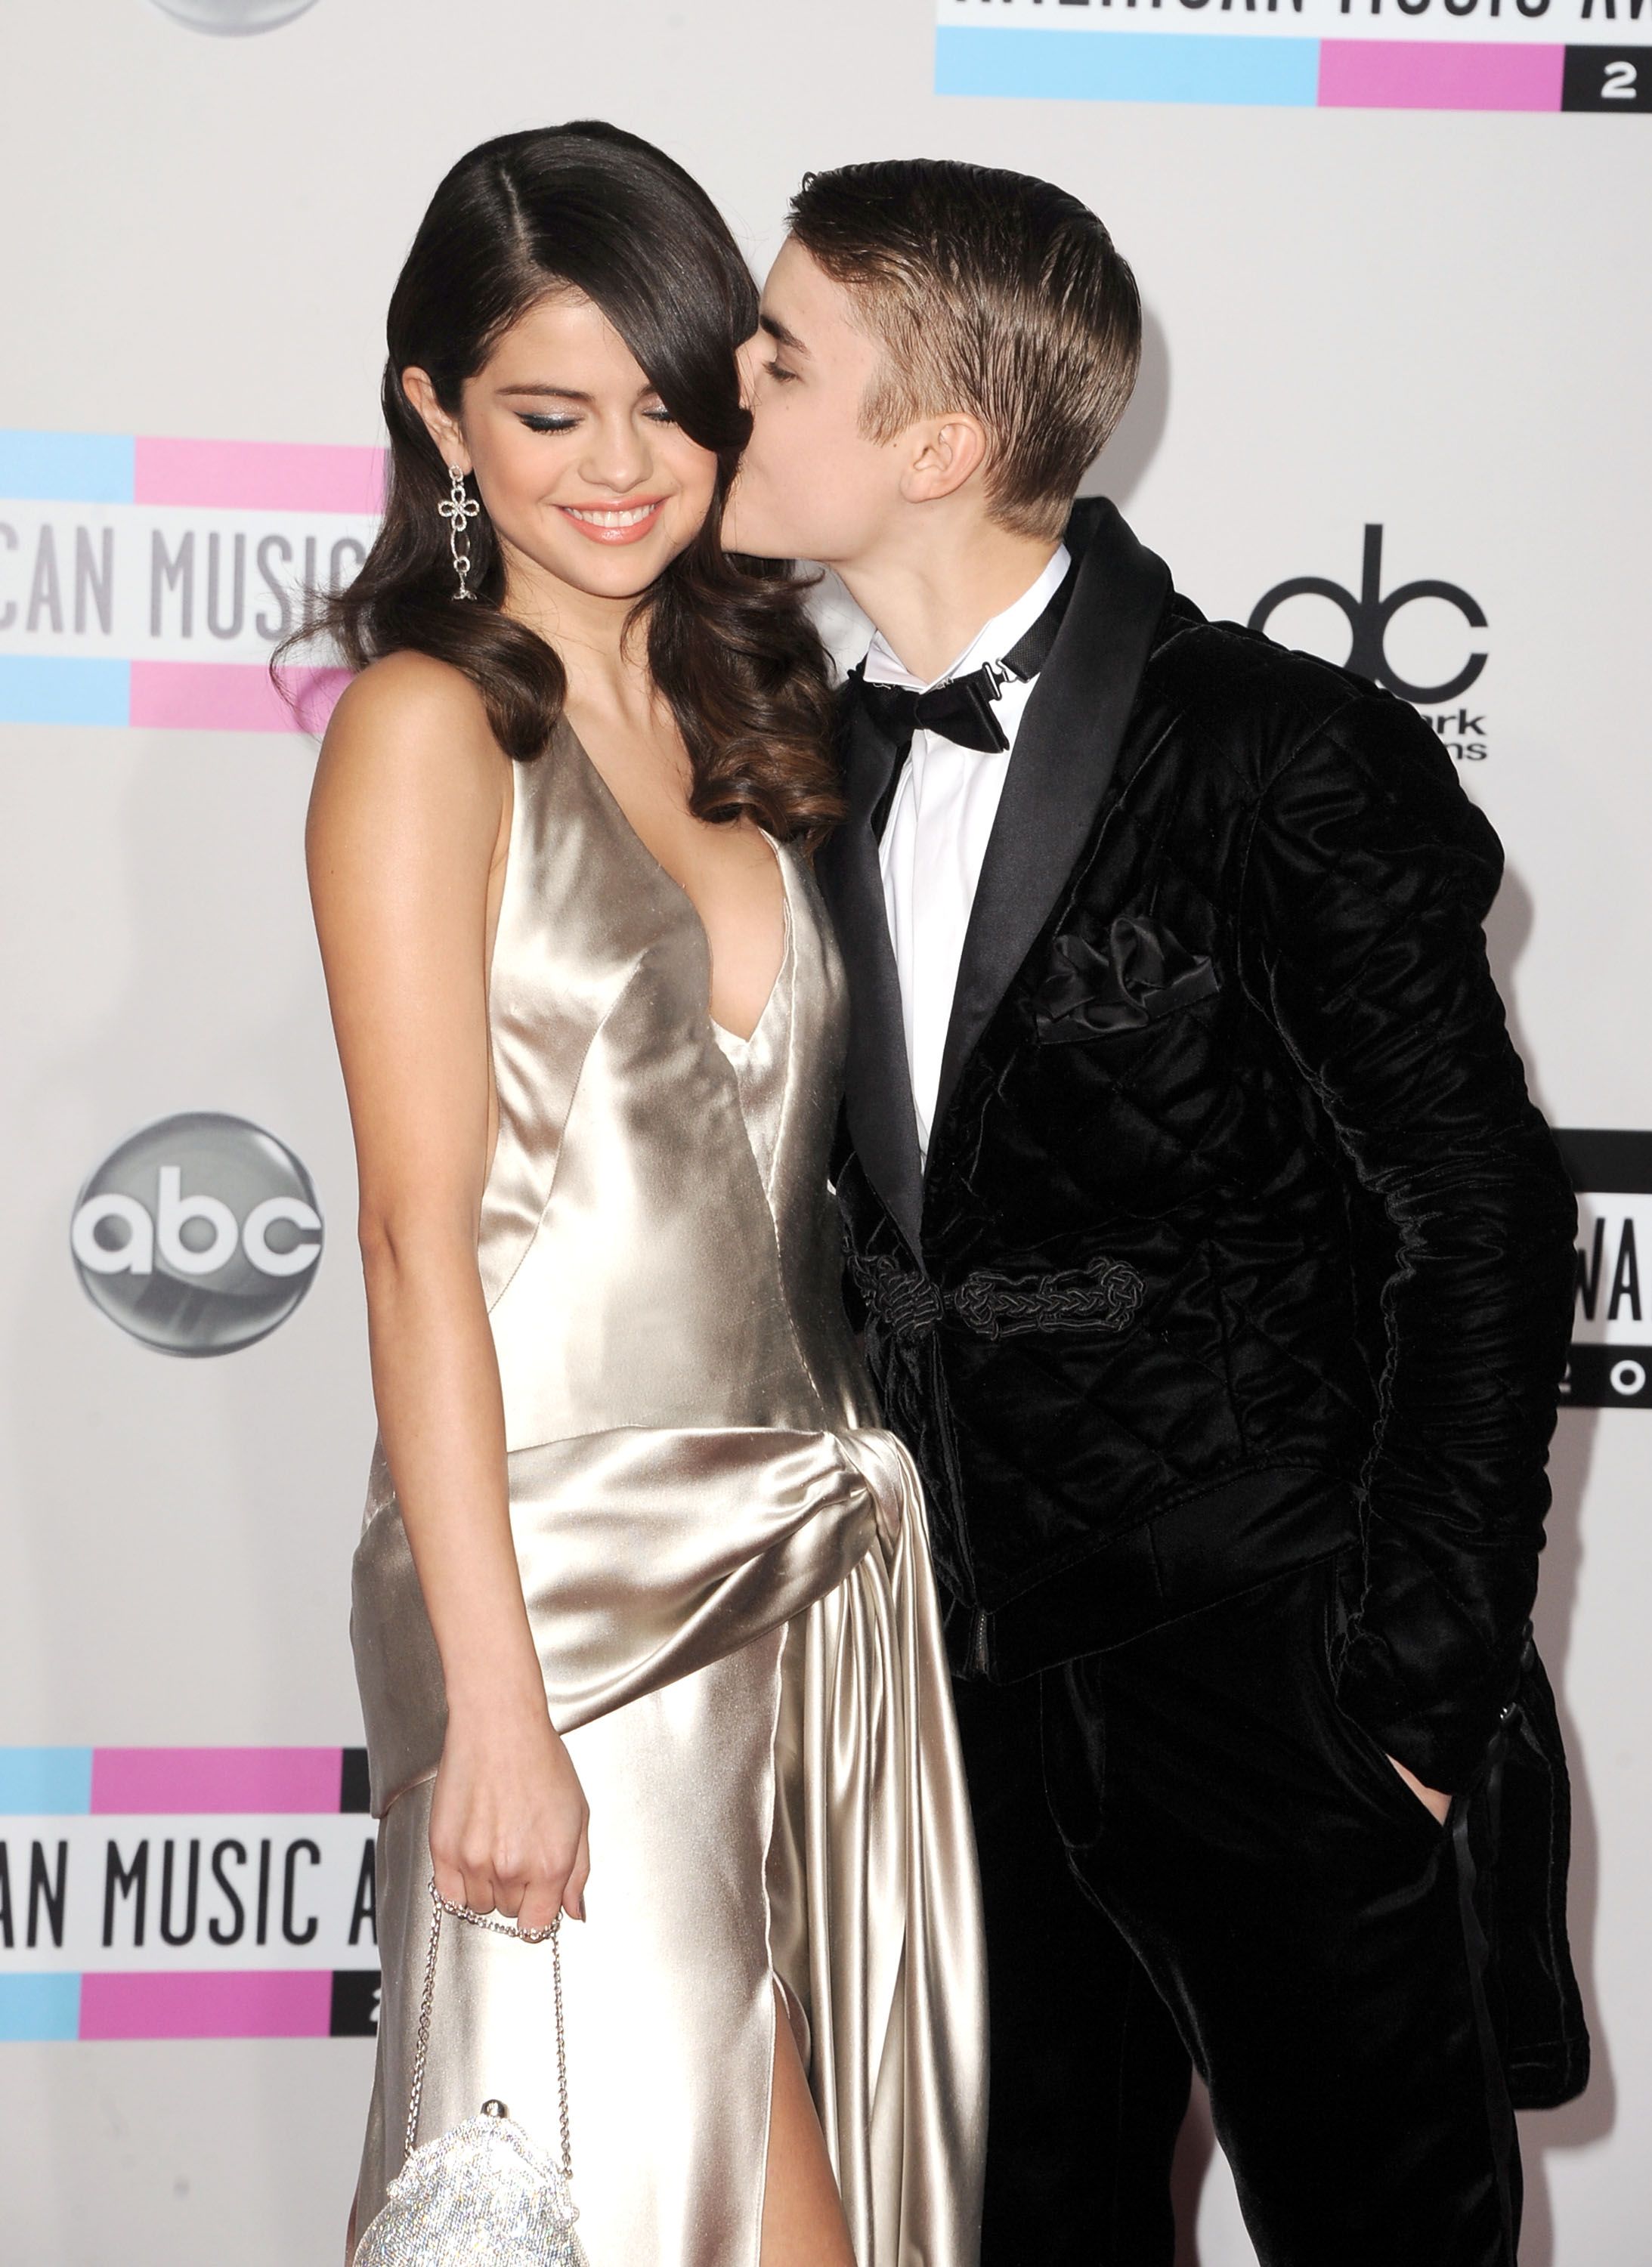 Justien Beiber N Selina Sex Video - Justin Bieber and Selena Gomez's relationship timeline of their relationship